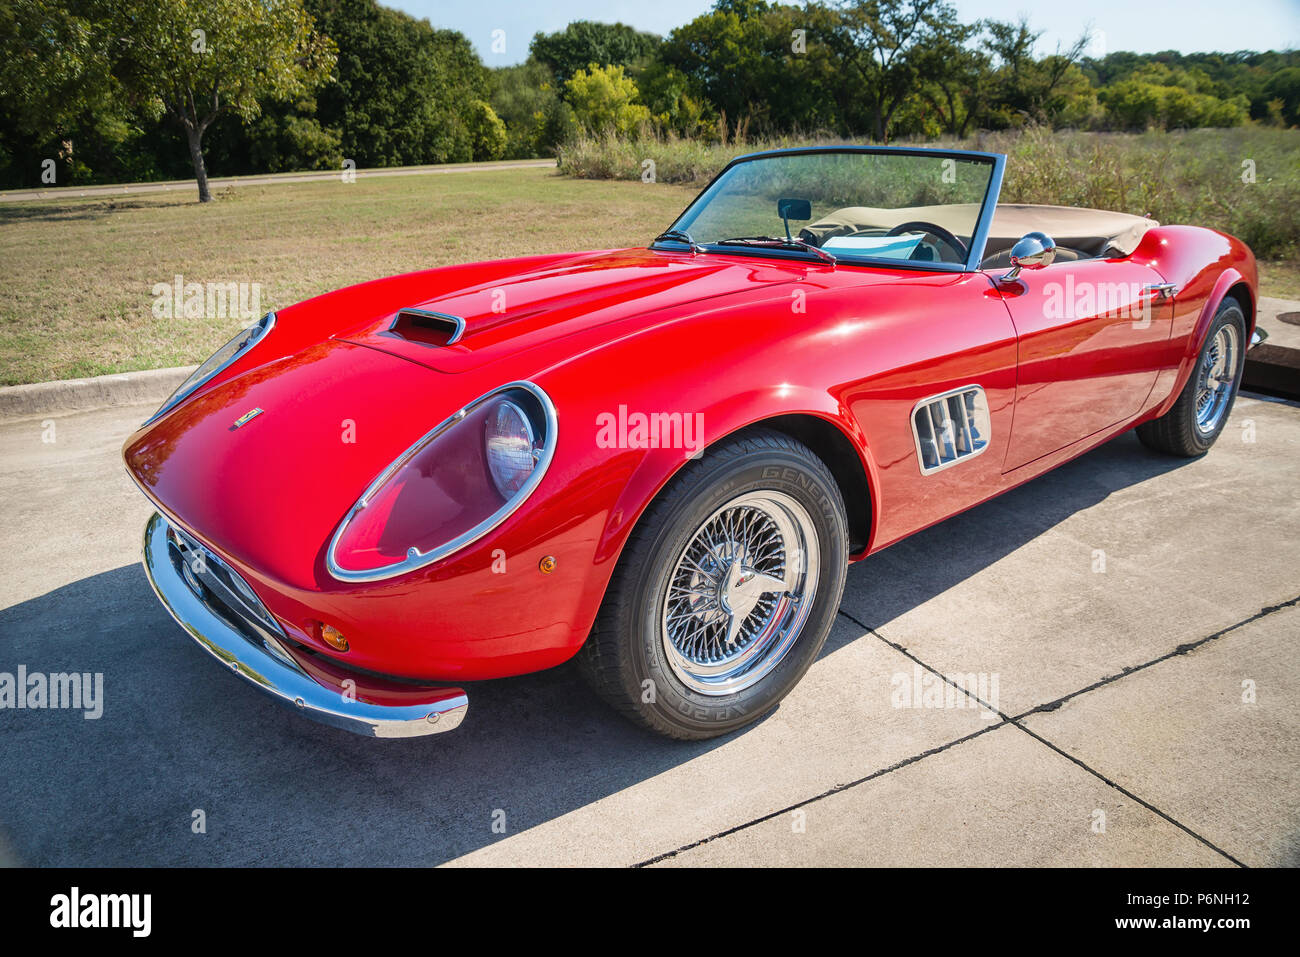 A Red 1962 Ferrari 250 Gt California Spyder American Classic Car Front Side View Stock Photo Alamy